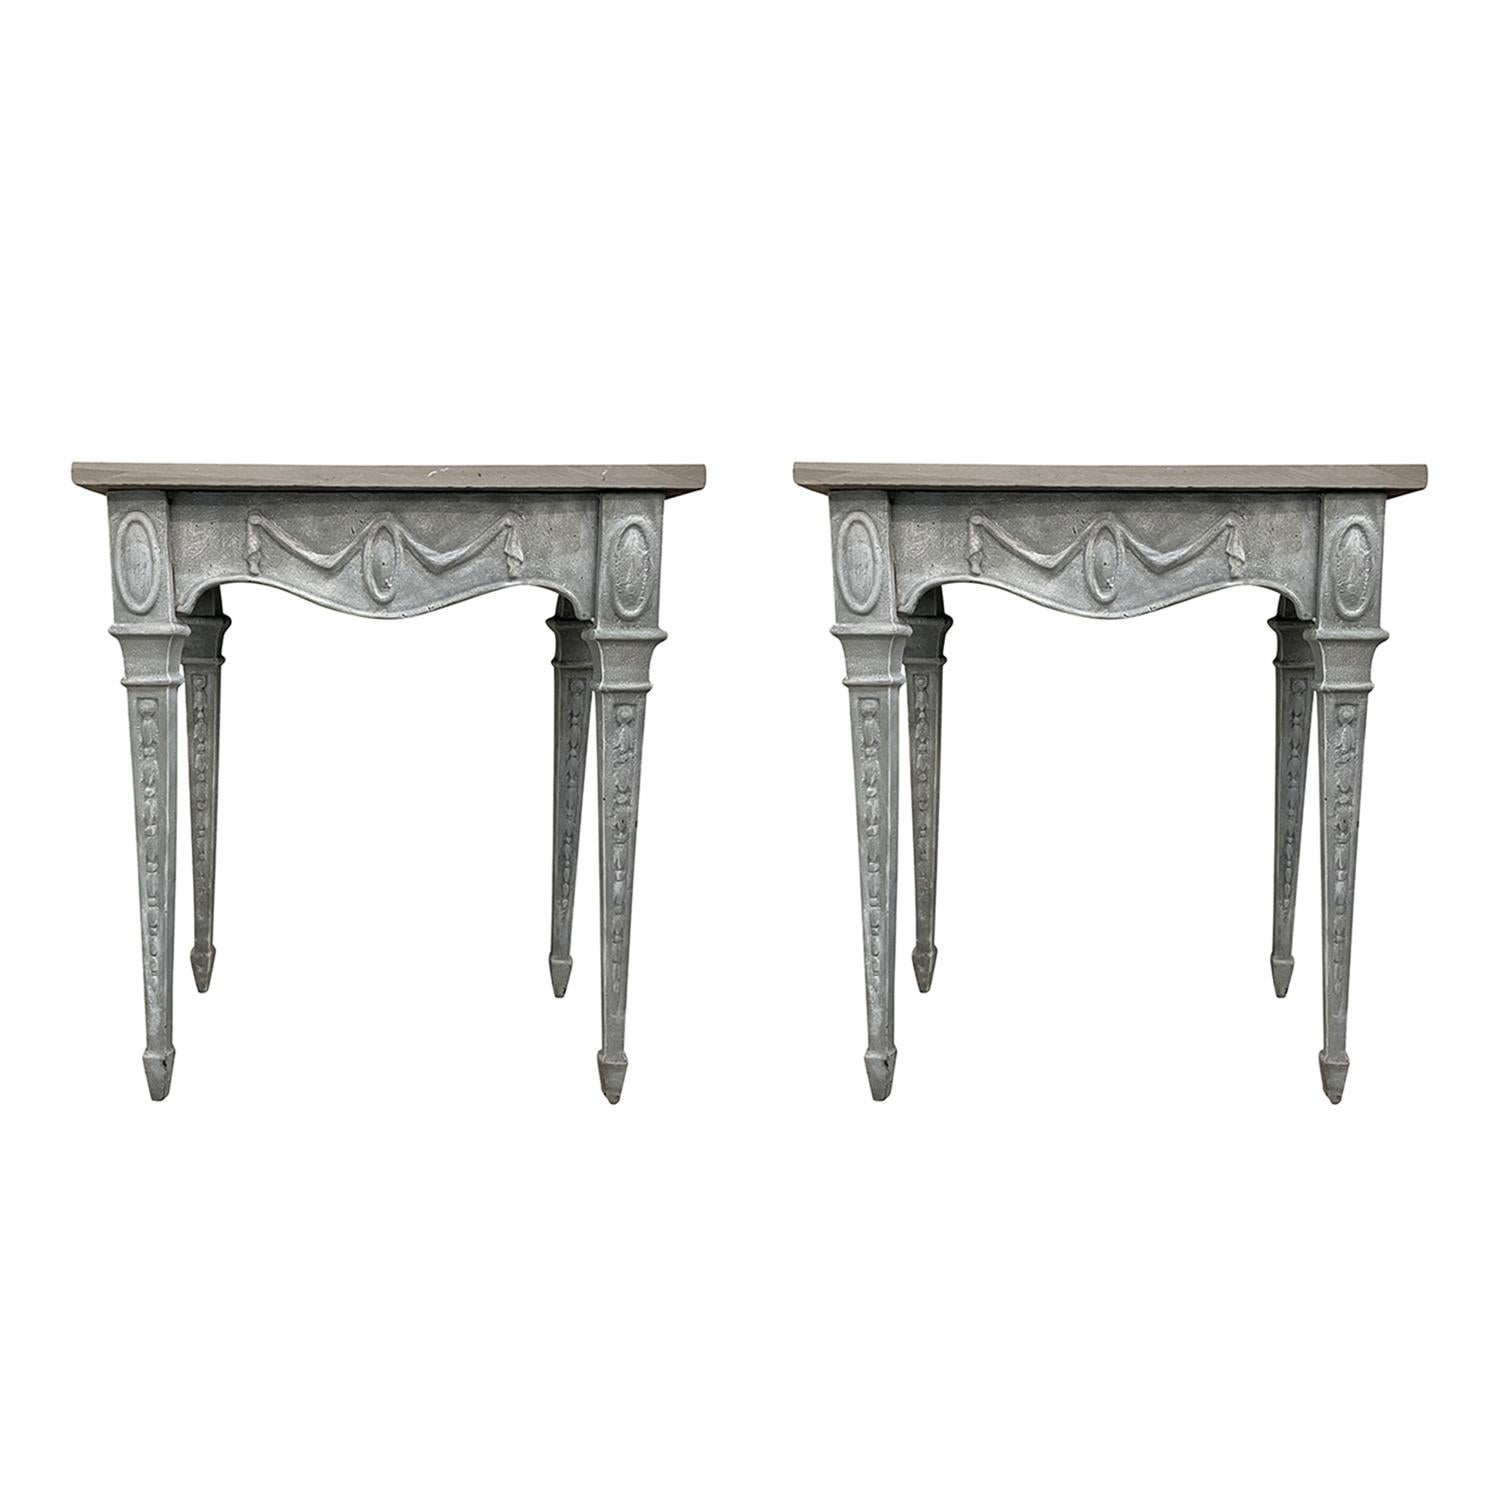 A grey, antique Regency English pair of console tables made of hand crafted cast iron, in good condition. The freestanding end tables are composed with a slate top, standing on four long legs. Wear consistent with age and use. circa 1920, England.